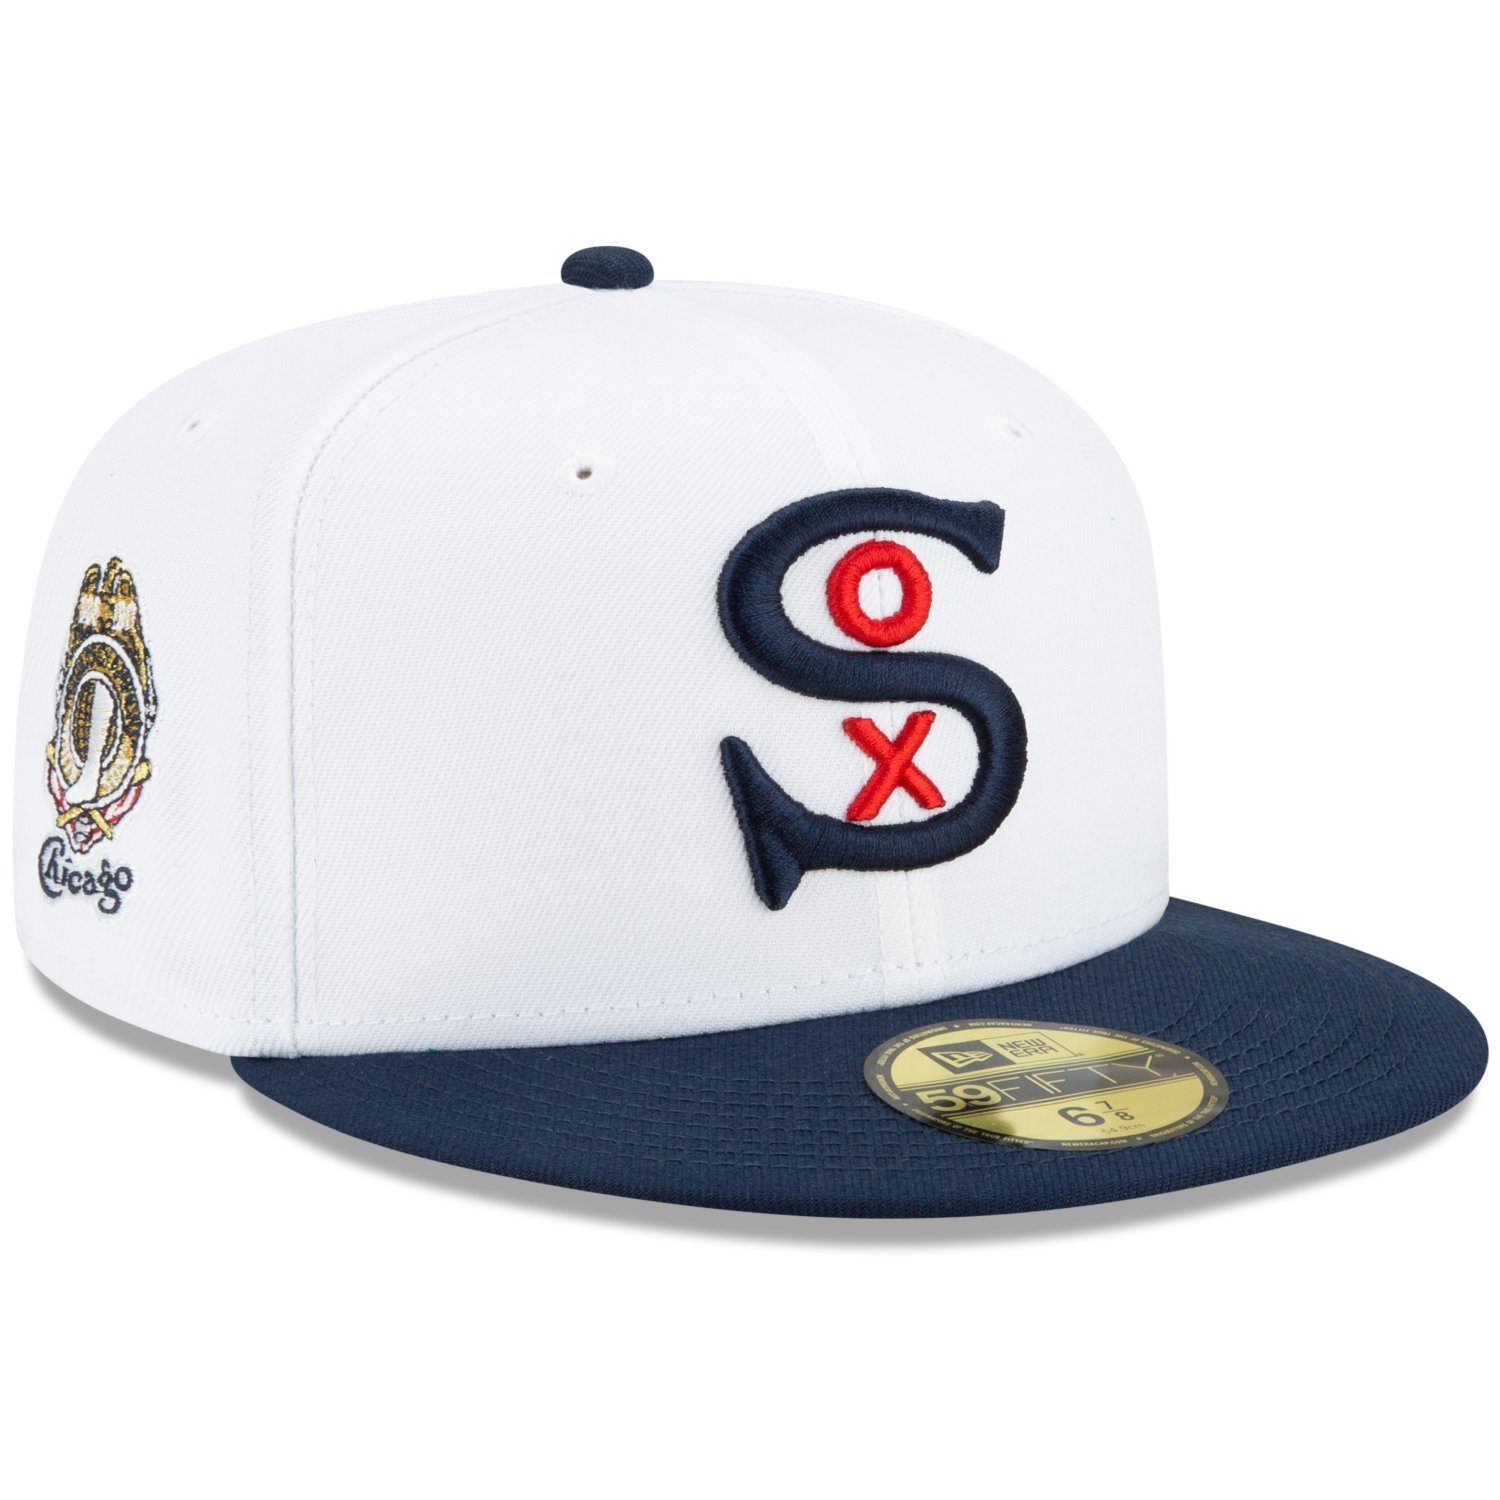 New Era Fitted Cap 59Fifty WORLD SERIES Chicago White Sox | Fitted Caps